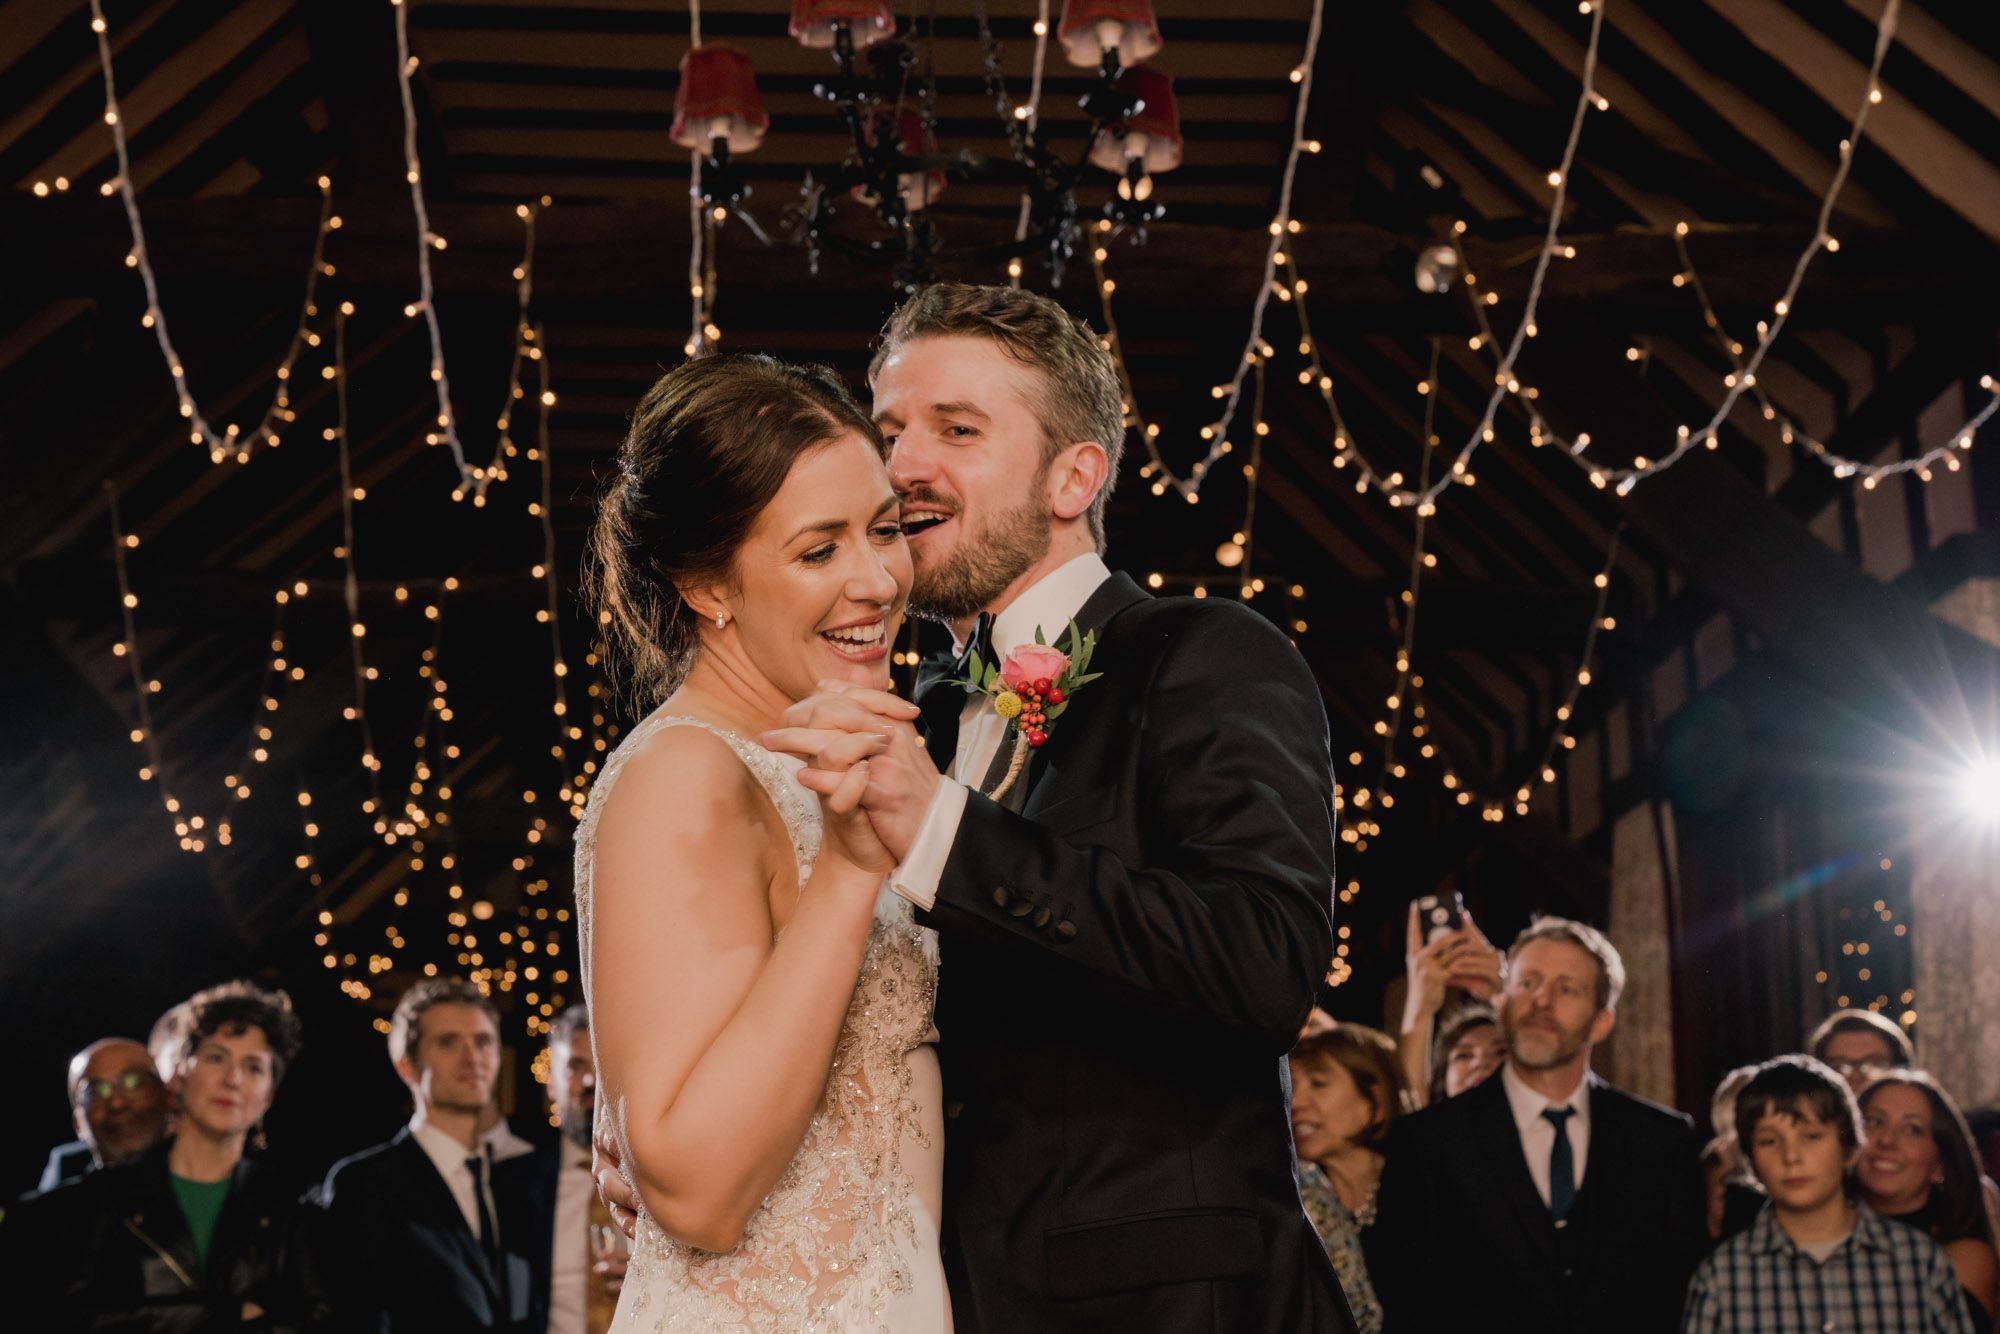 Bride and groom have their first dance together on their wedding day at Ramster Hall.